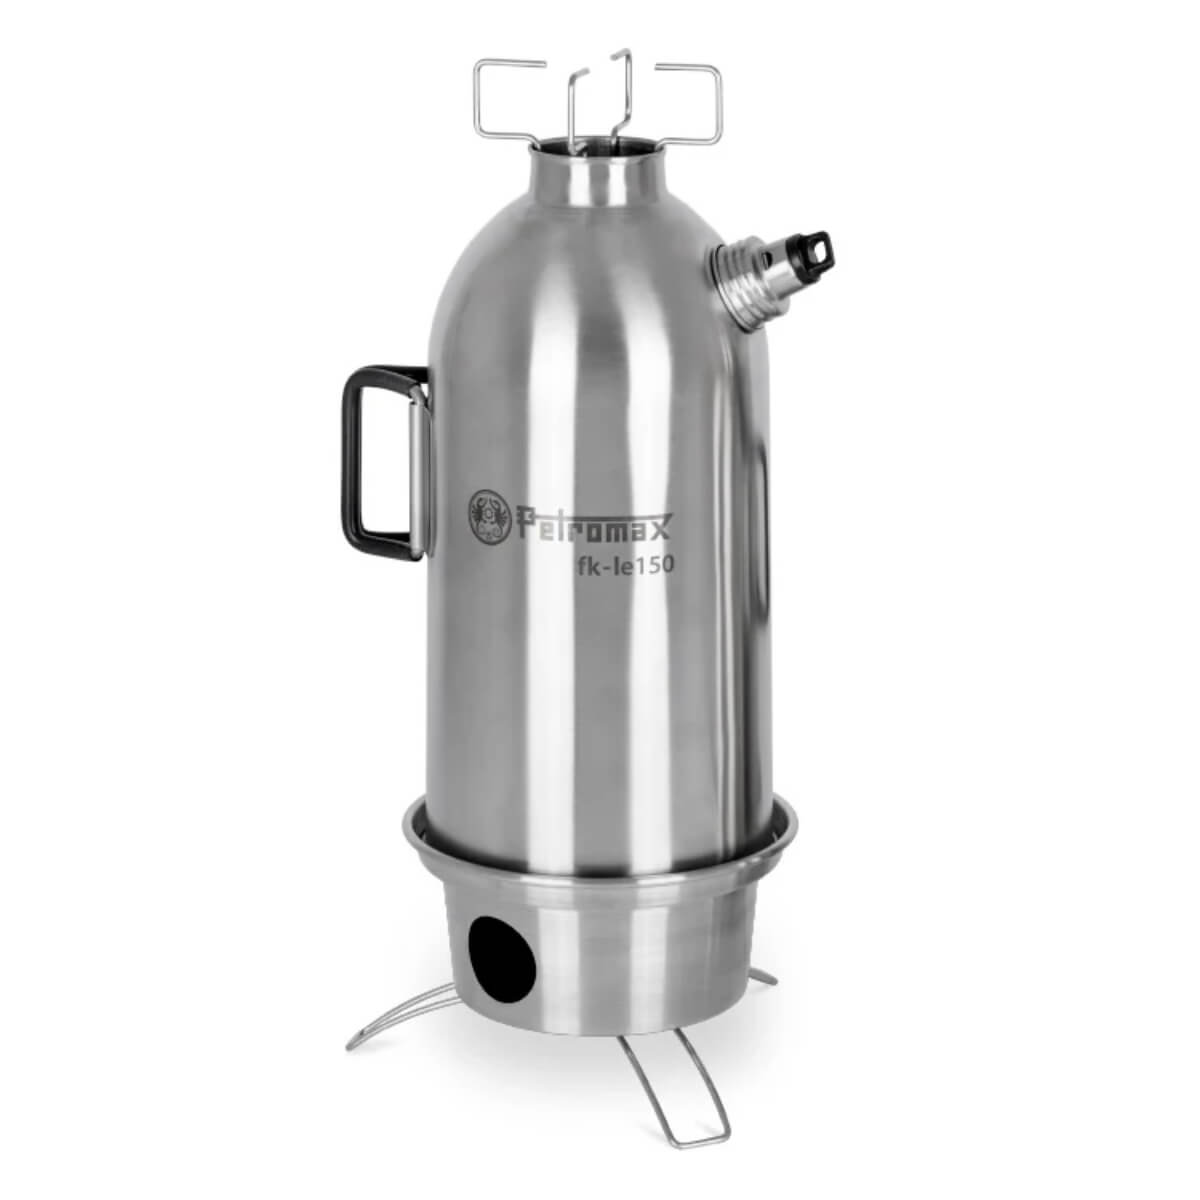 Petromax 1.5L Stainless Steel Fire Kettle